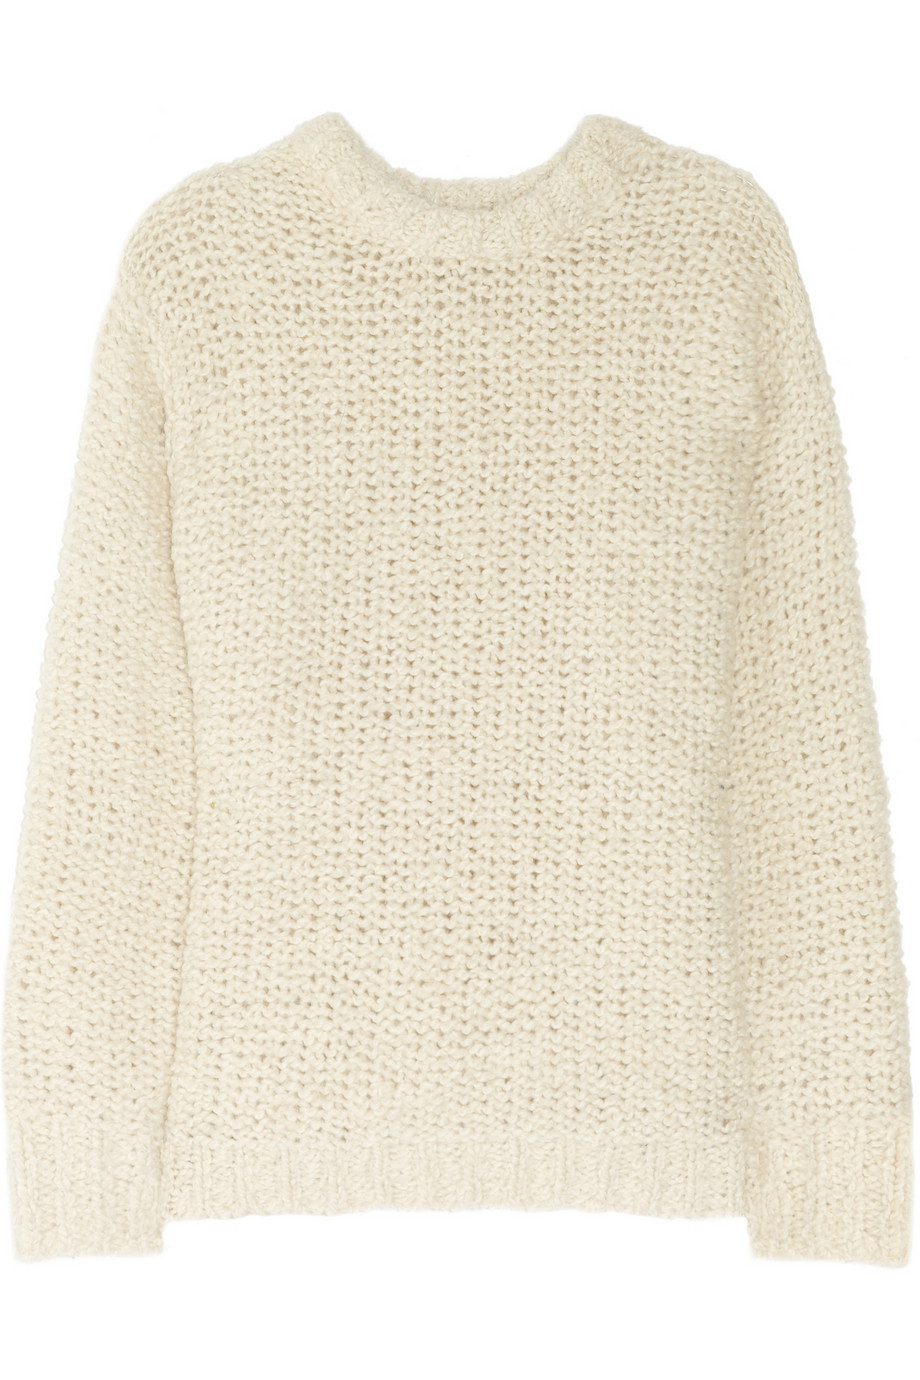 Lyst - Isabel marant Quena Chunky Wool Sweater in Natural